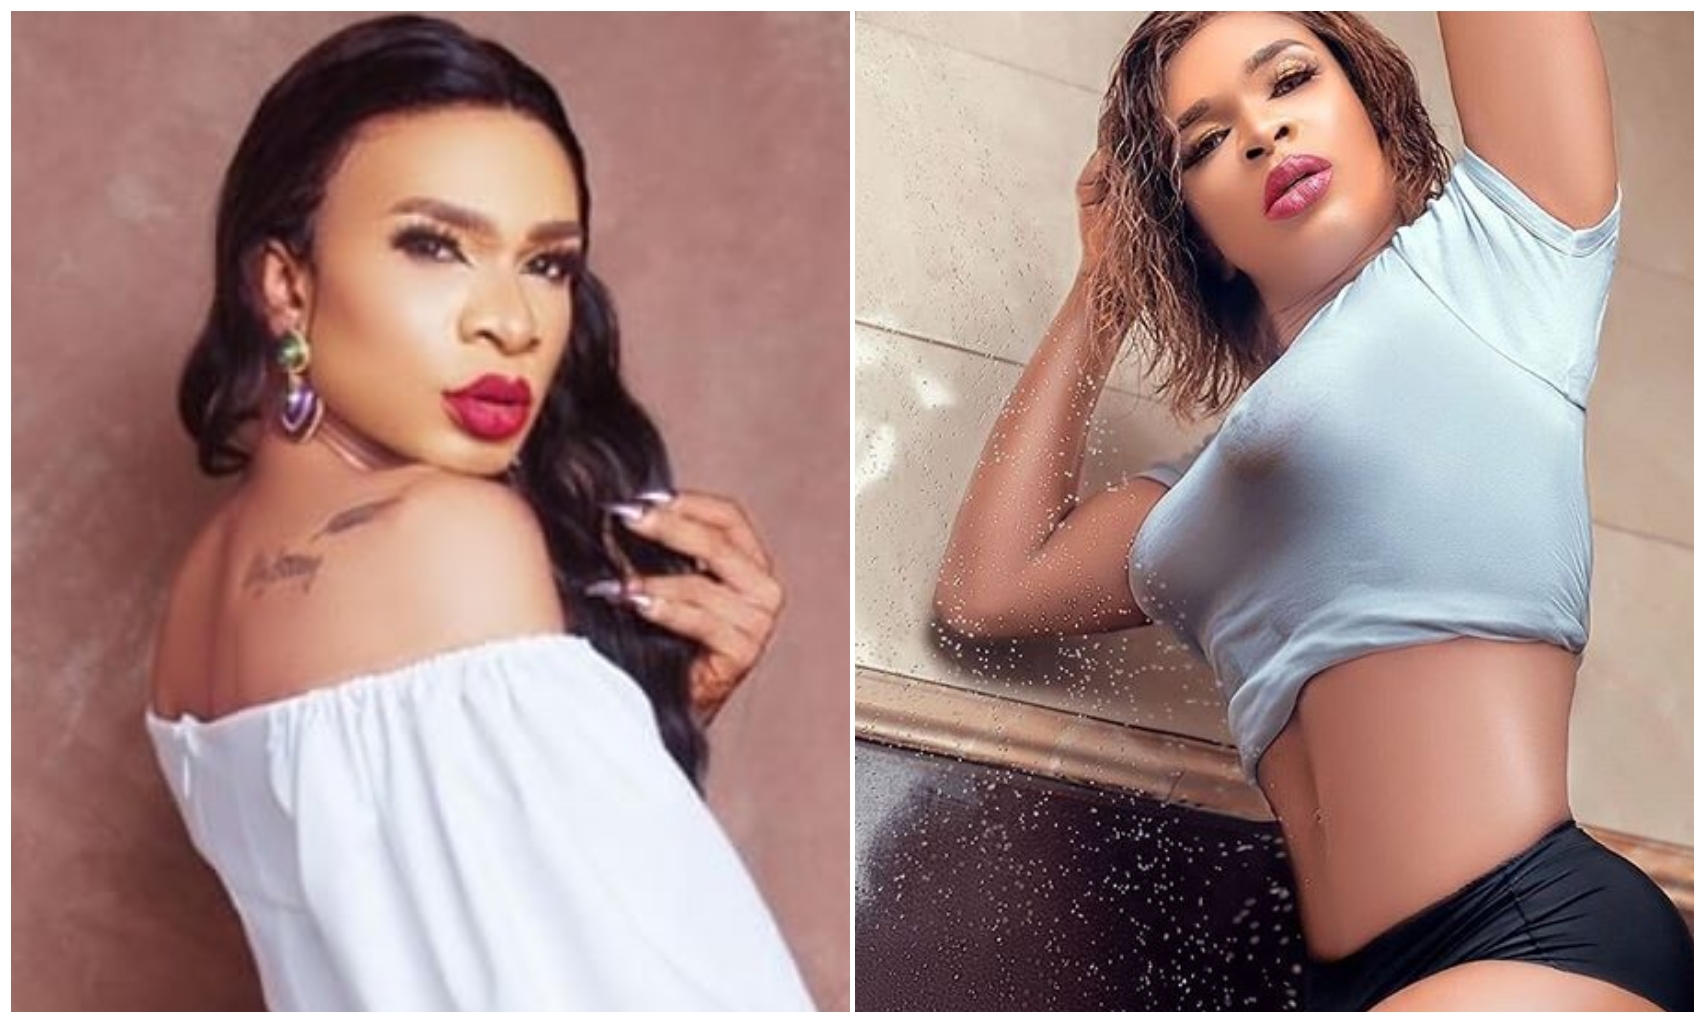 EndSars: Some protesters' intention is to seduce men – Cross-dresser Bryan cries out